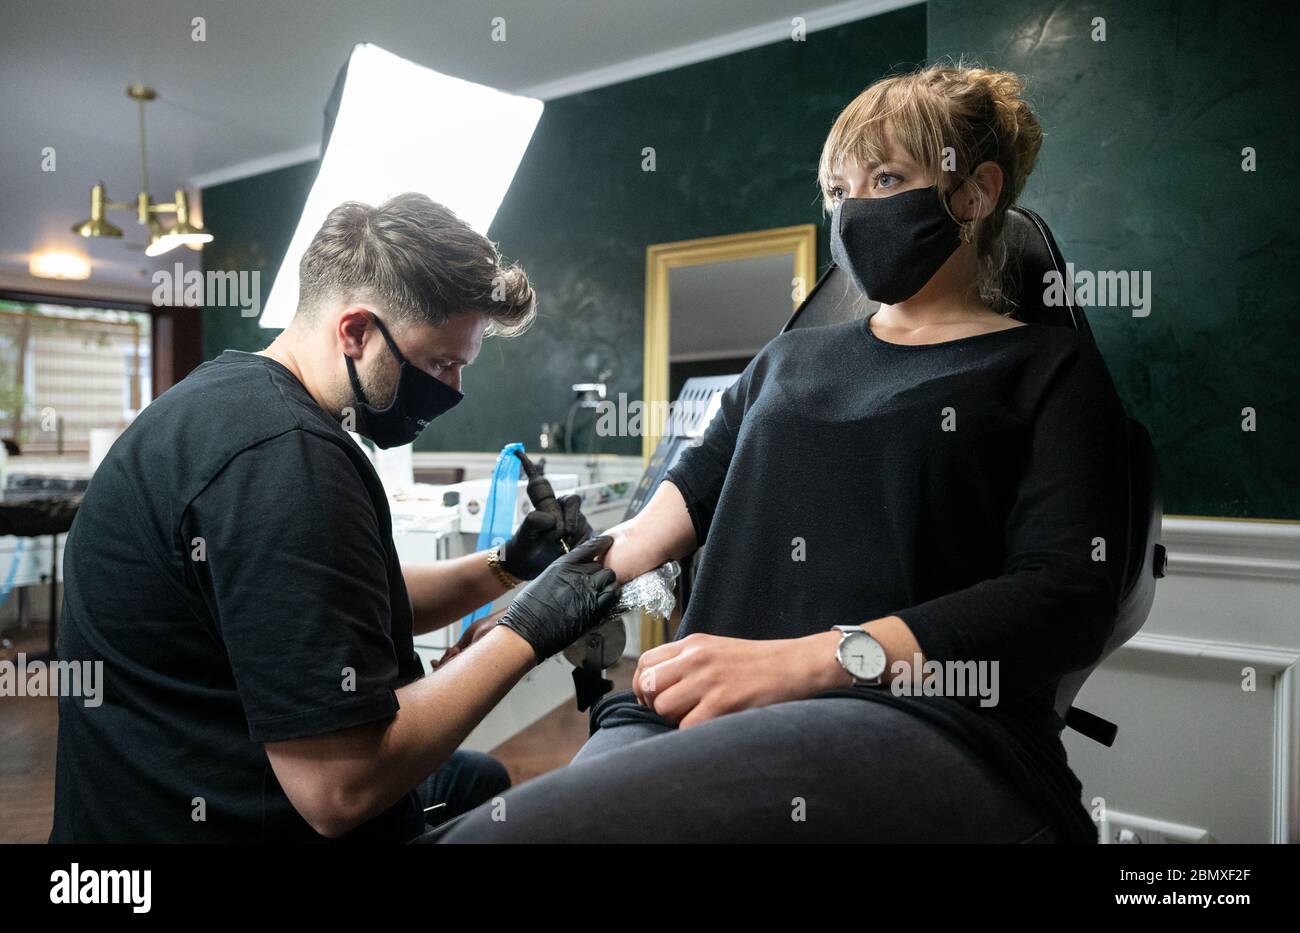 Stuttgart, Germany. 11th May, 2020. An employee of the tattoo studio 'Mommy I'm Sorry' tattoos a customer on her forearm. From 11 May onwards, relaxed corona rules apply in Baden-Württemberg. Among other things, tattoo studios are open again under certain conditions. Credit: Marijan Murat/dpa - ATTENTION: For editorial use only in connection with reporting on the relaxation of requirements to contain the Corona pandemic and only with full mention of the above credit/dpa/Alamy Live News Stock Photo